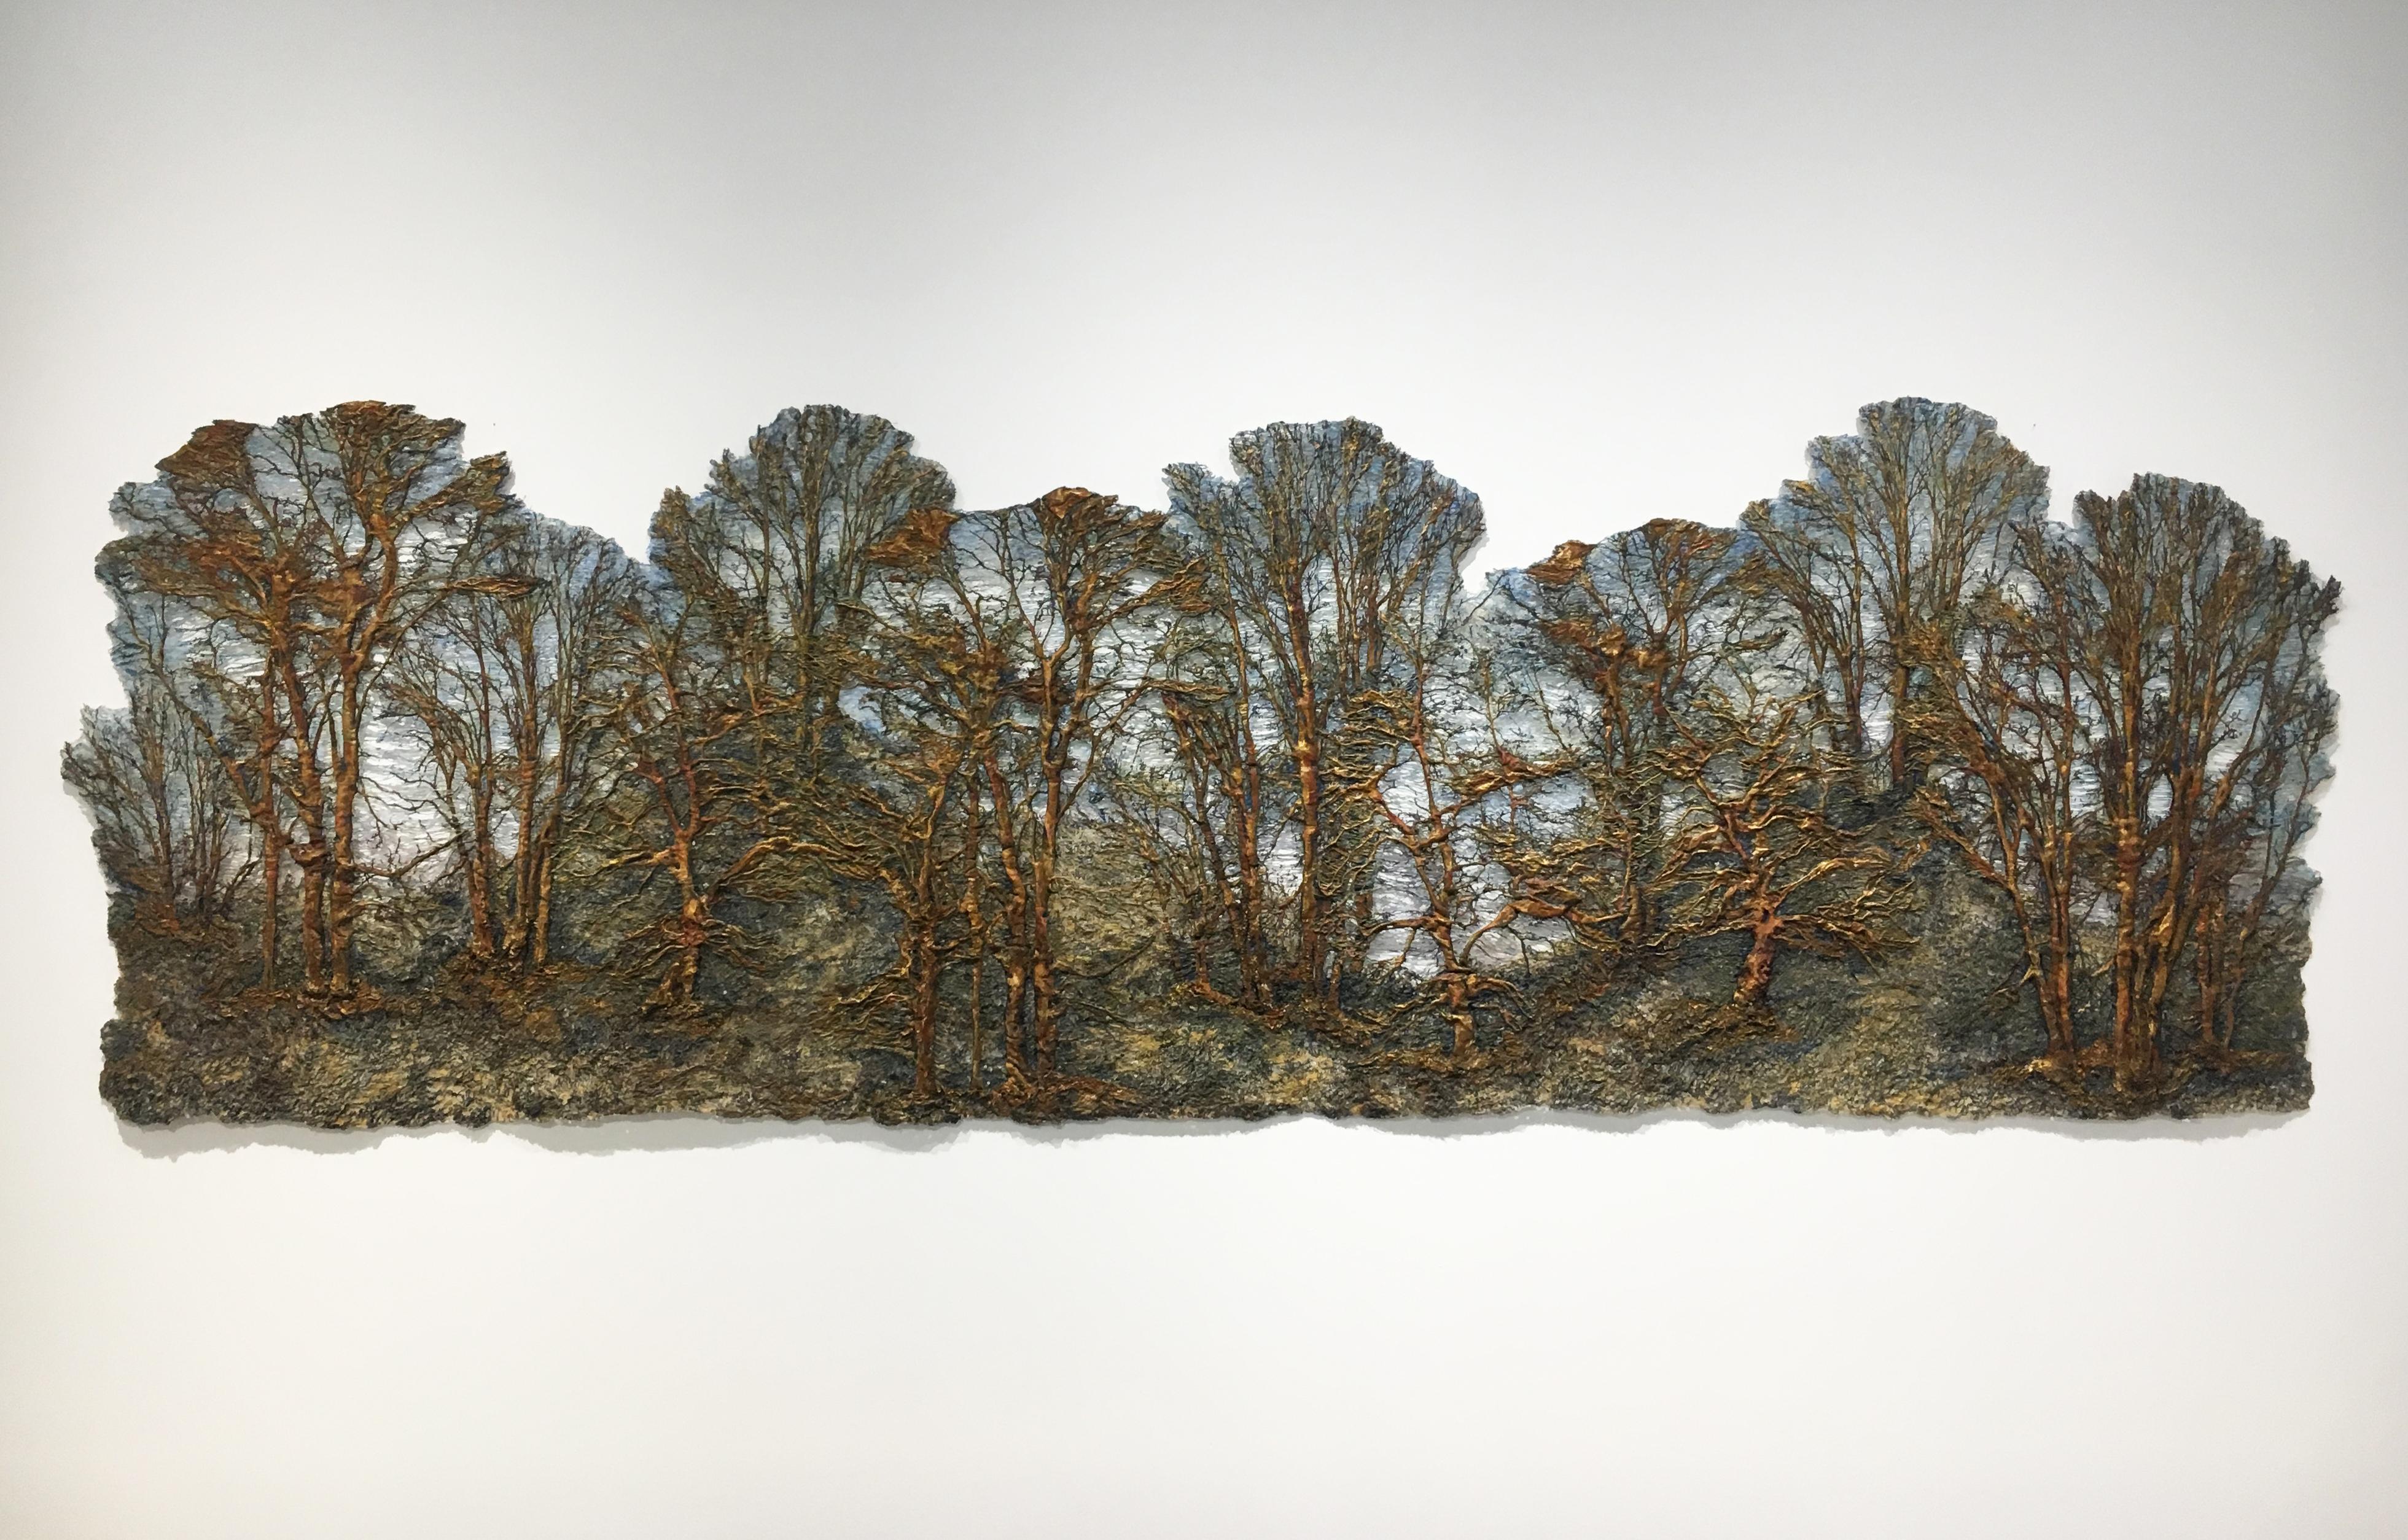 "Forest", silk and cotton mixed media wall mounting sculpture, paint and patina